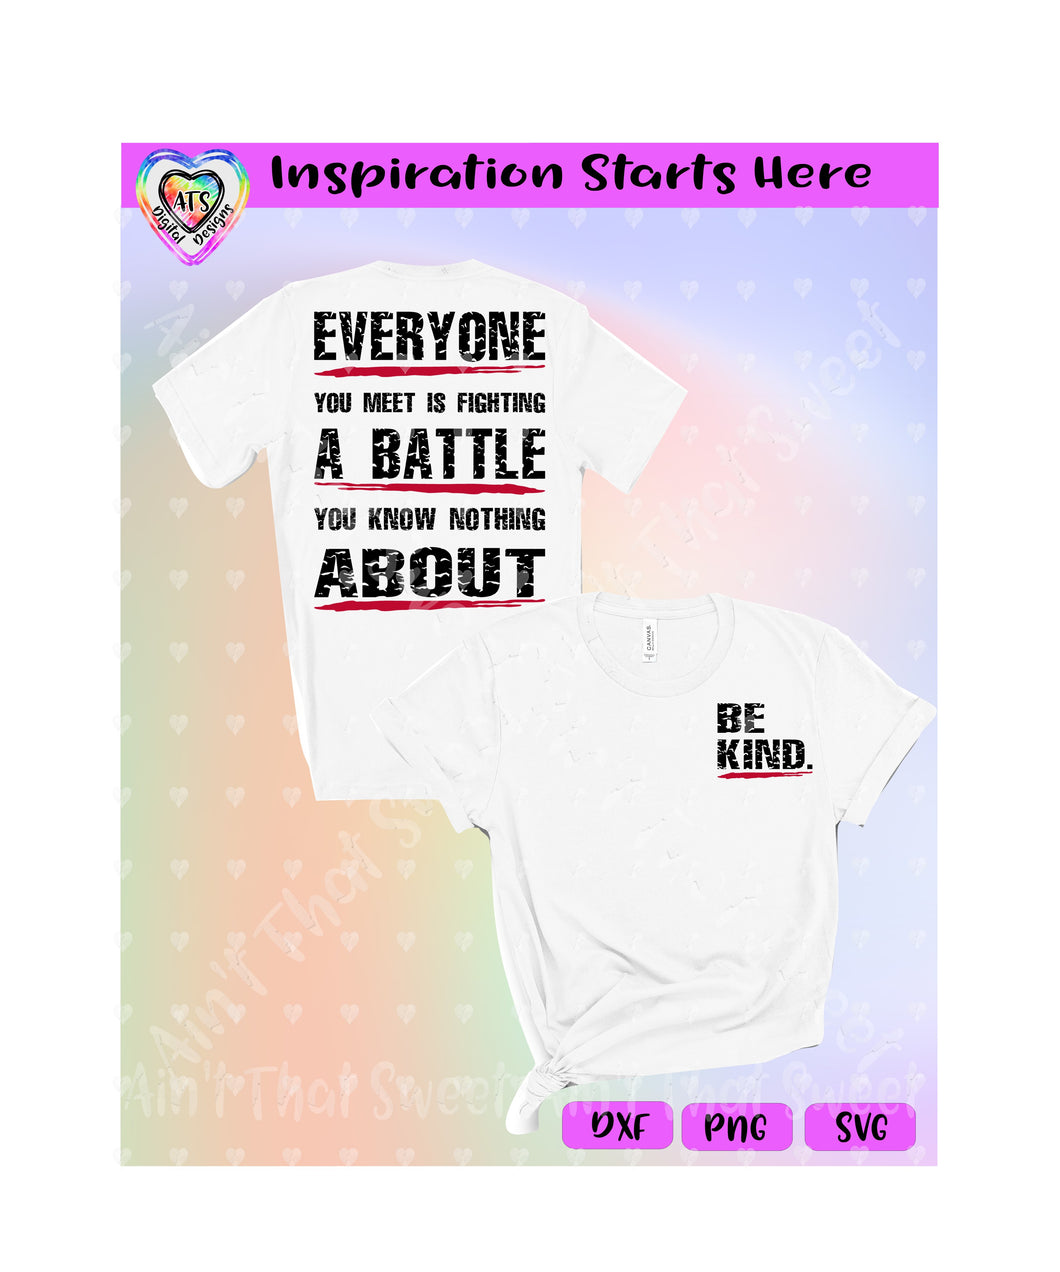 Everyone You Meet Is Fighting A Battle You Know Nothing About ... Be Kind. - Transparent PNG SVG DXF - Silhouette, Cricut, ScanNCut